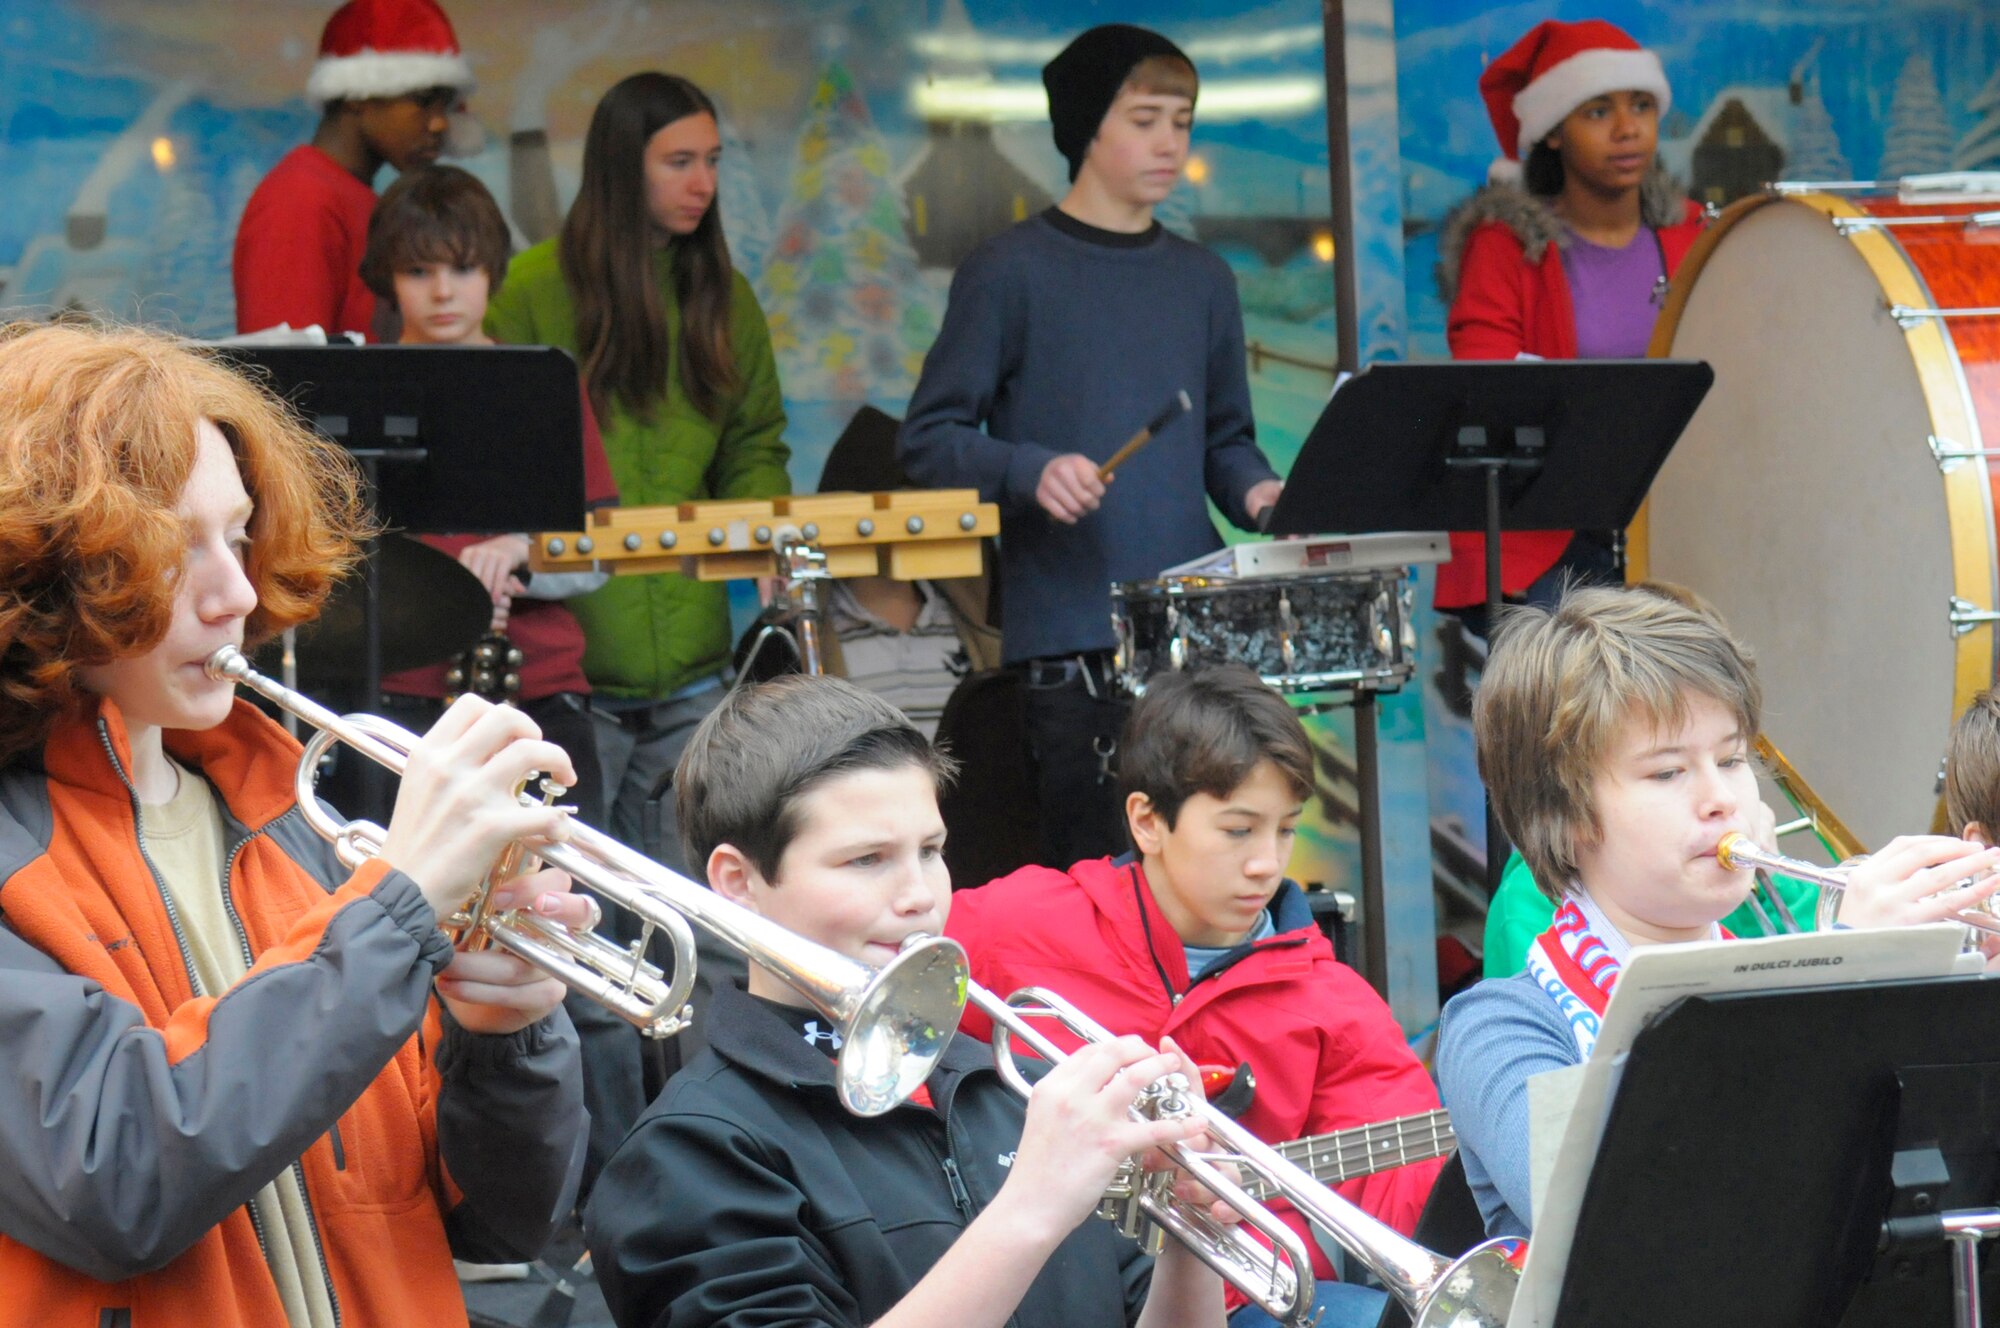 The Ramstein Middle School intermediate and advance band performs for the German and American community during the Christmas market in Kaiserslautern, Germany, Dec. 1, 2011. The market will be set up until Dec. 23 near Stiftskirche str. and on Schillerplatz str. (U.S. Air Force photo by Staff Sgt. Travis Edwards)